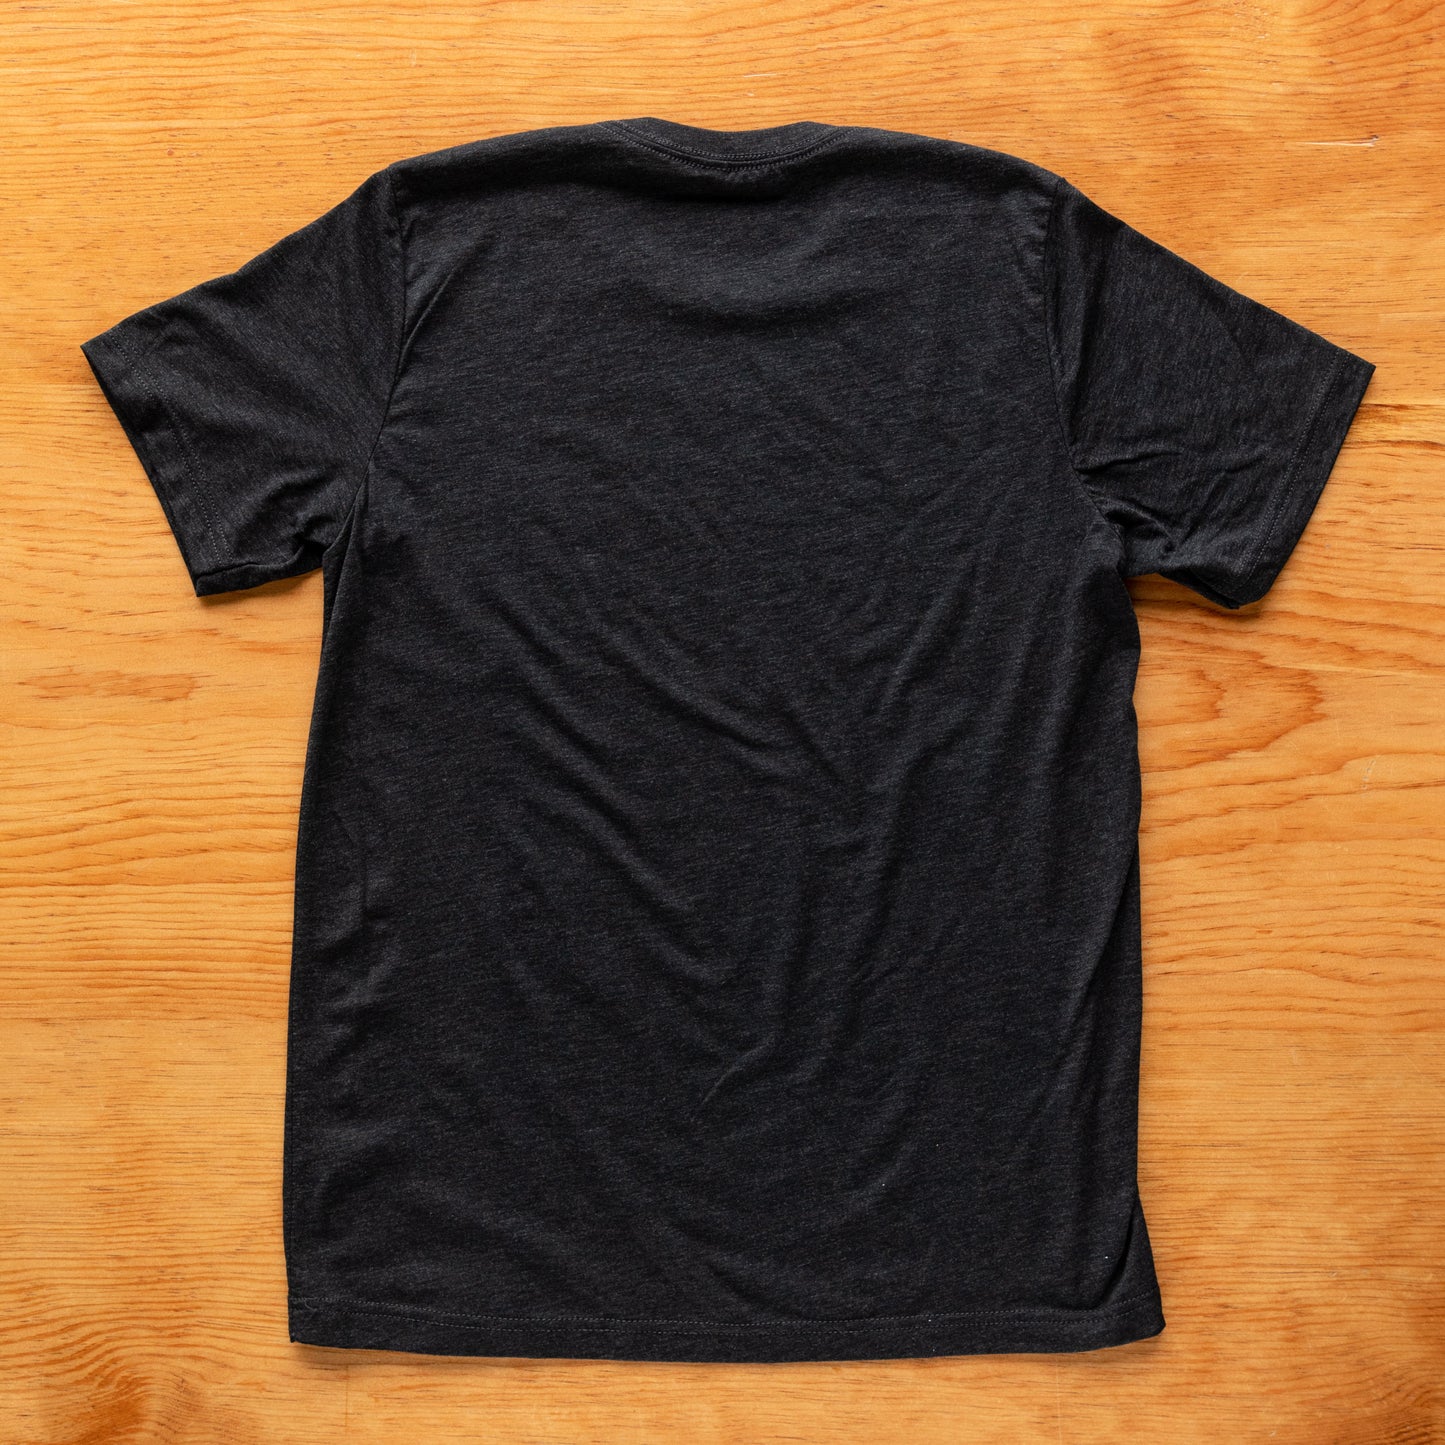 Side Project Circle Logo T-Shirt - Charcoal Black (4XL Only)